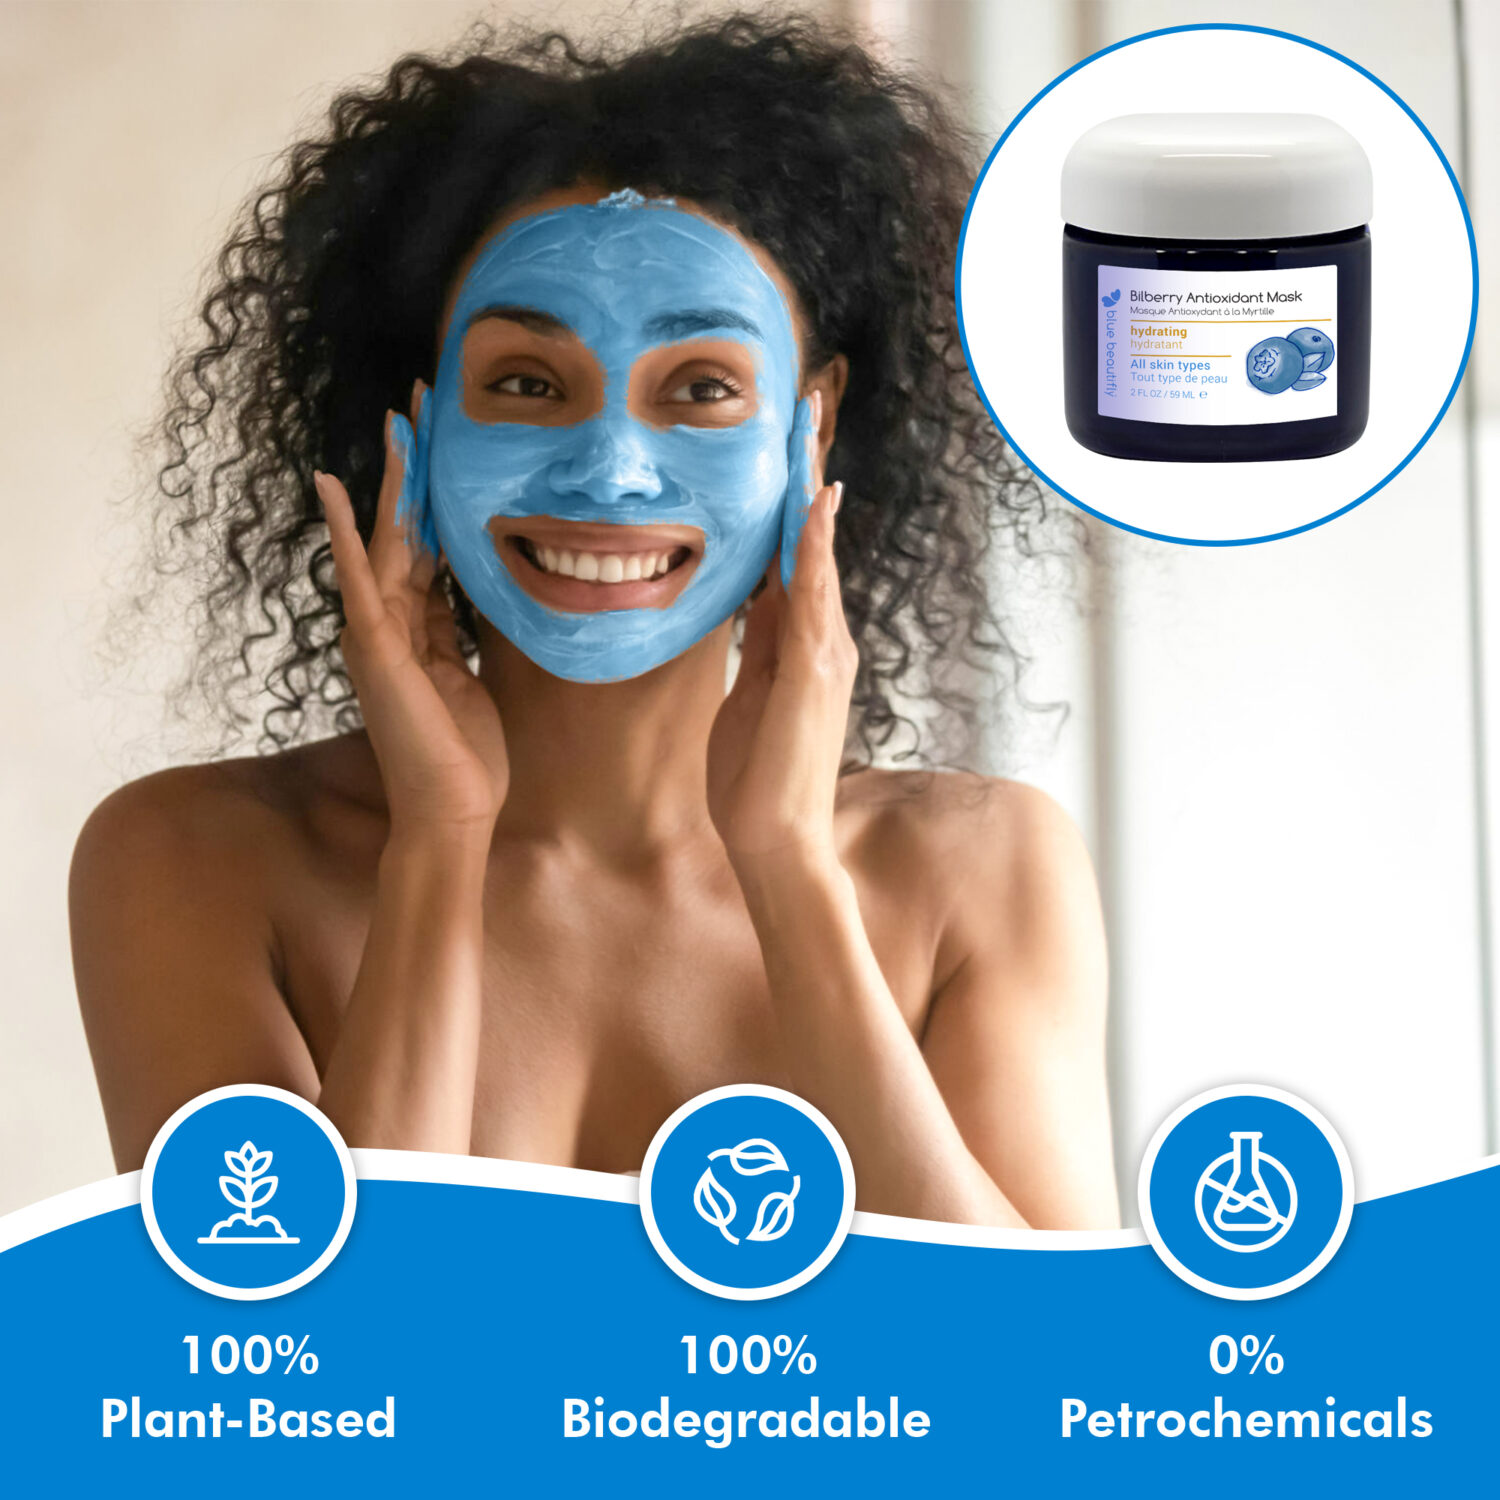 Blue Beautifly Bilberry Antioxidant Mask is 100% plant-based and biodegradable and contains no petrochemicals or toxins